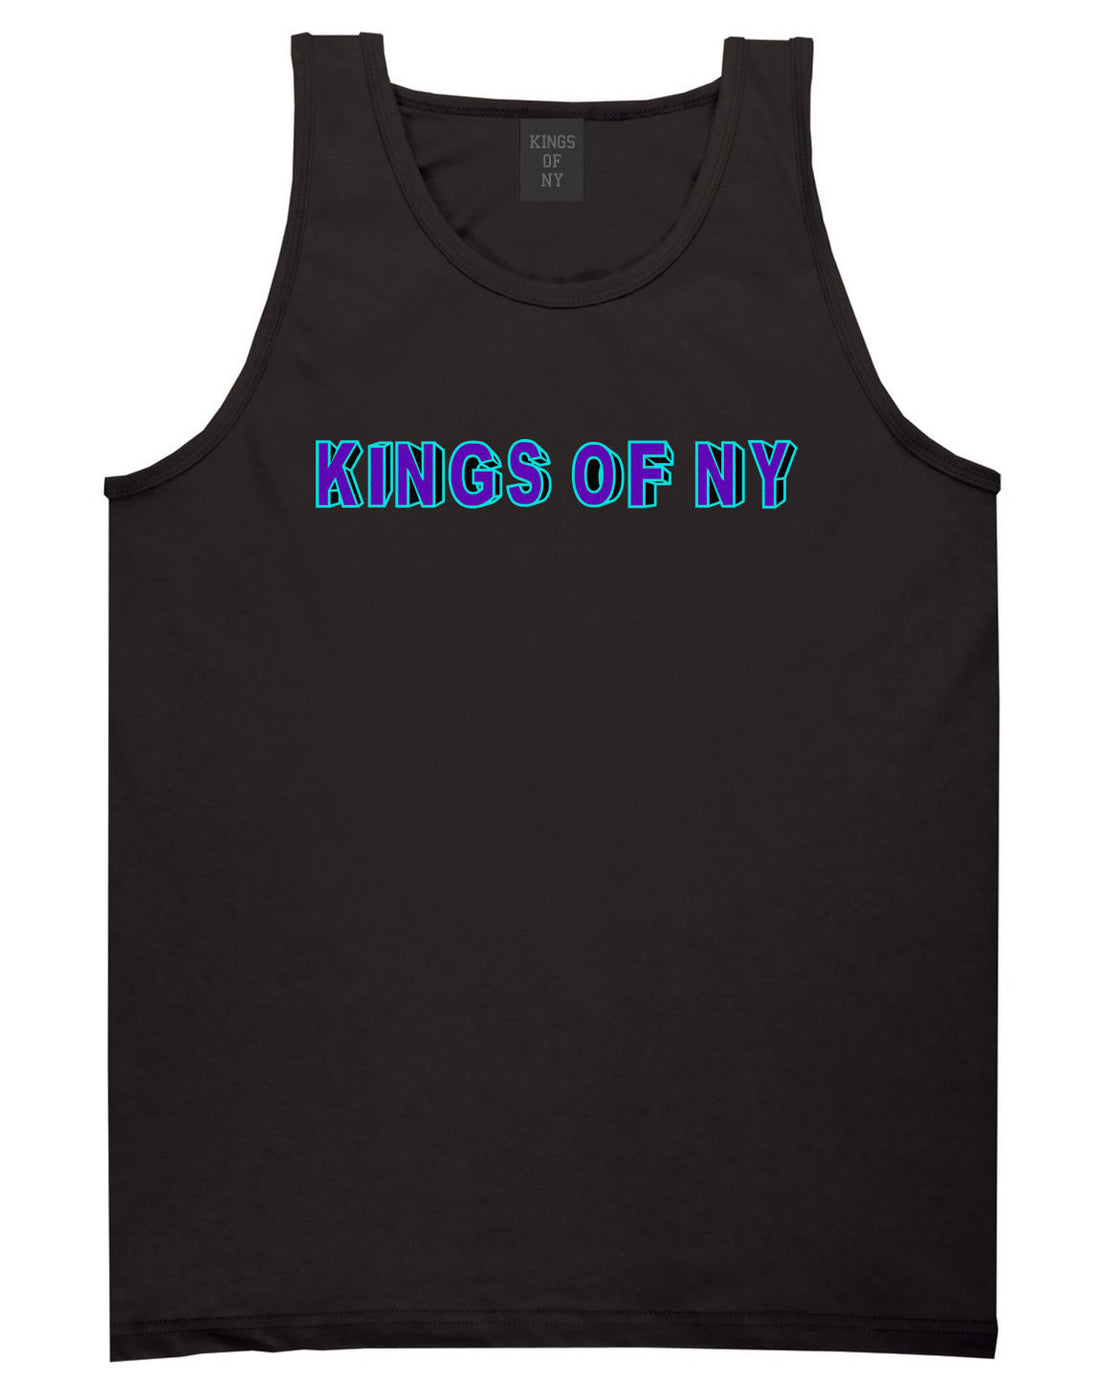 Bright Block Letters Tank Top in Black by Kings Of NY